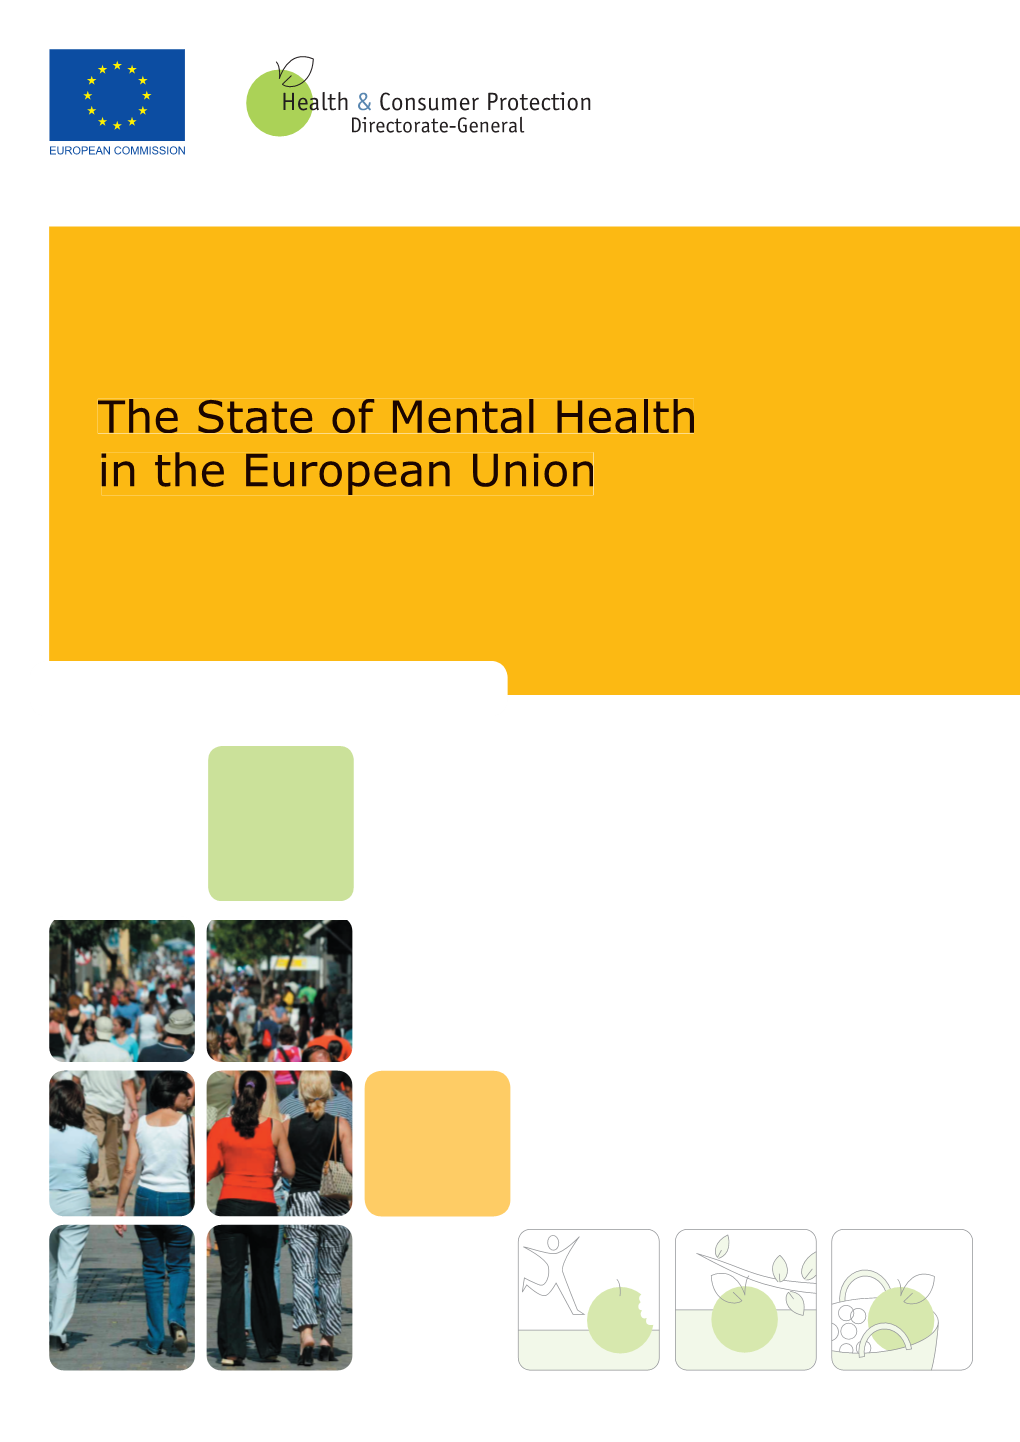 The State of Mental Health in the European Union